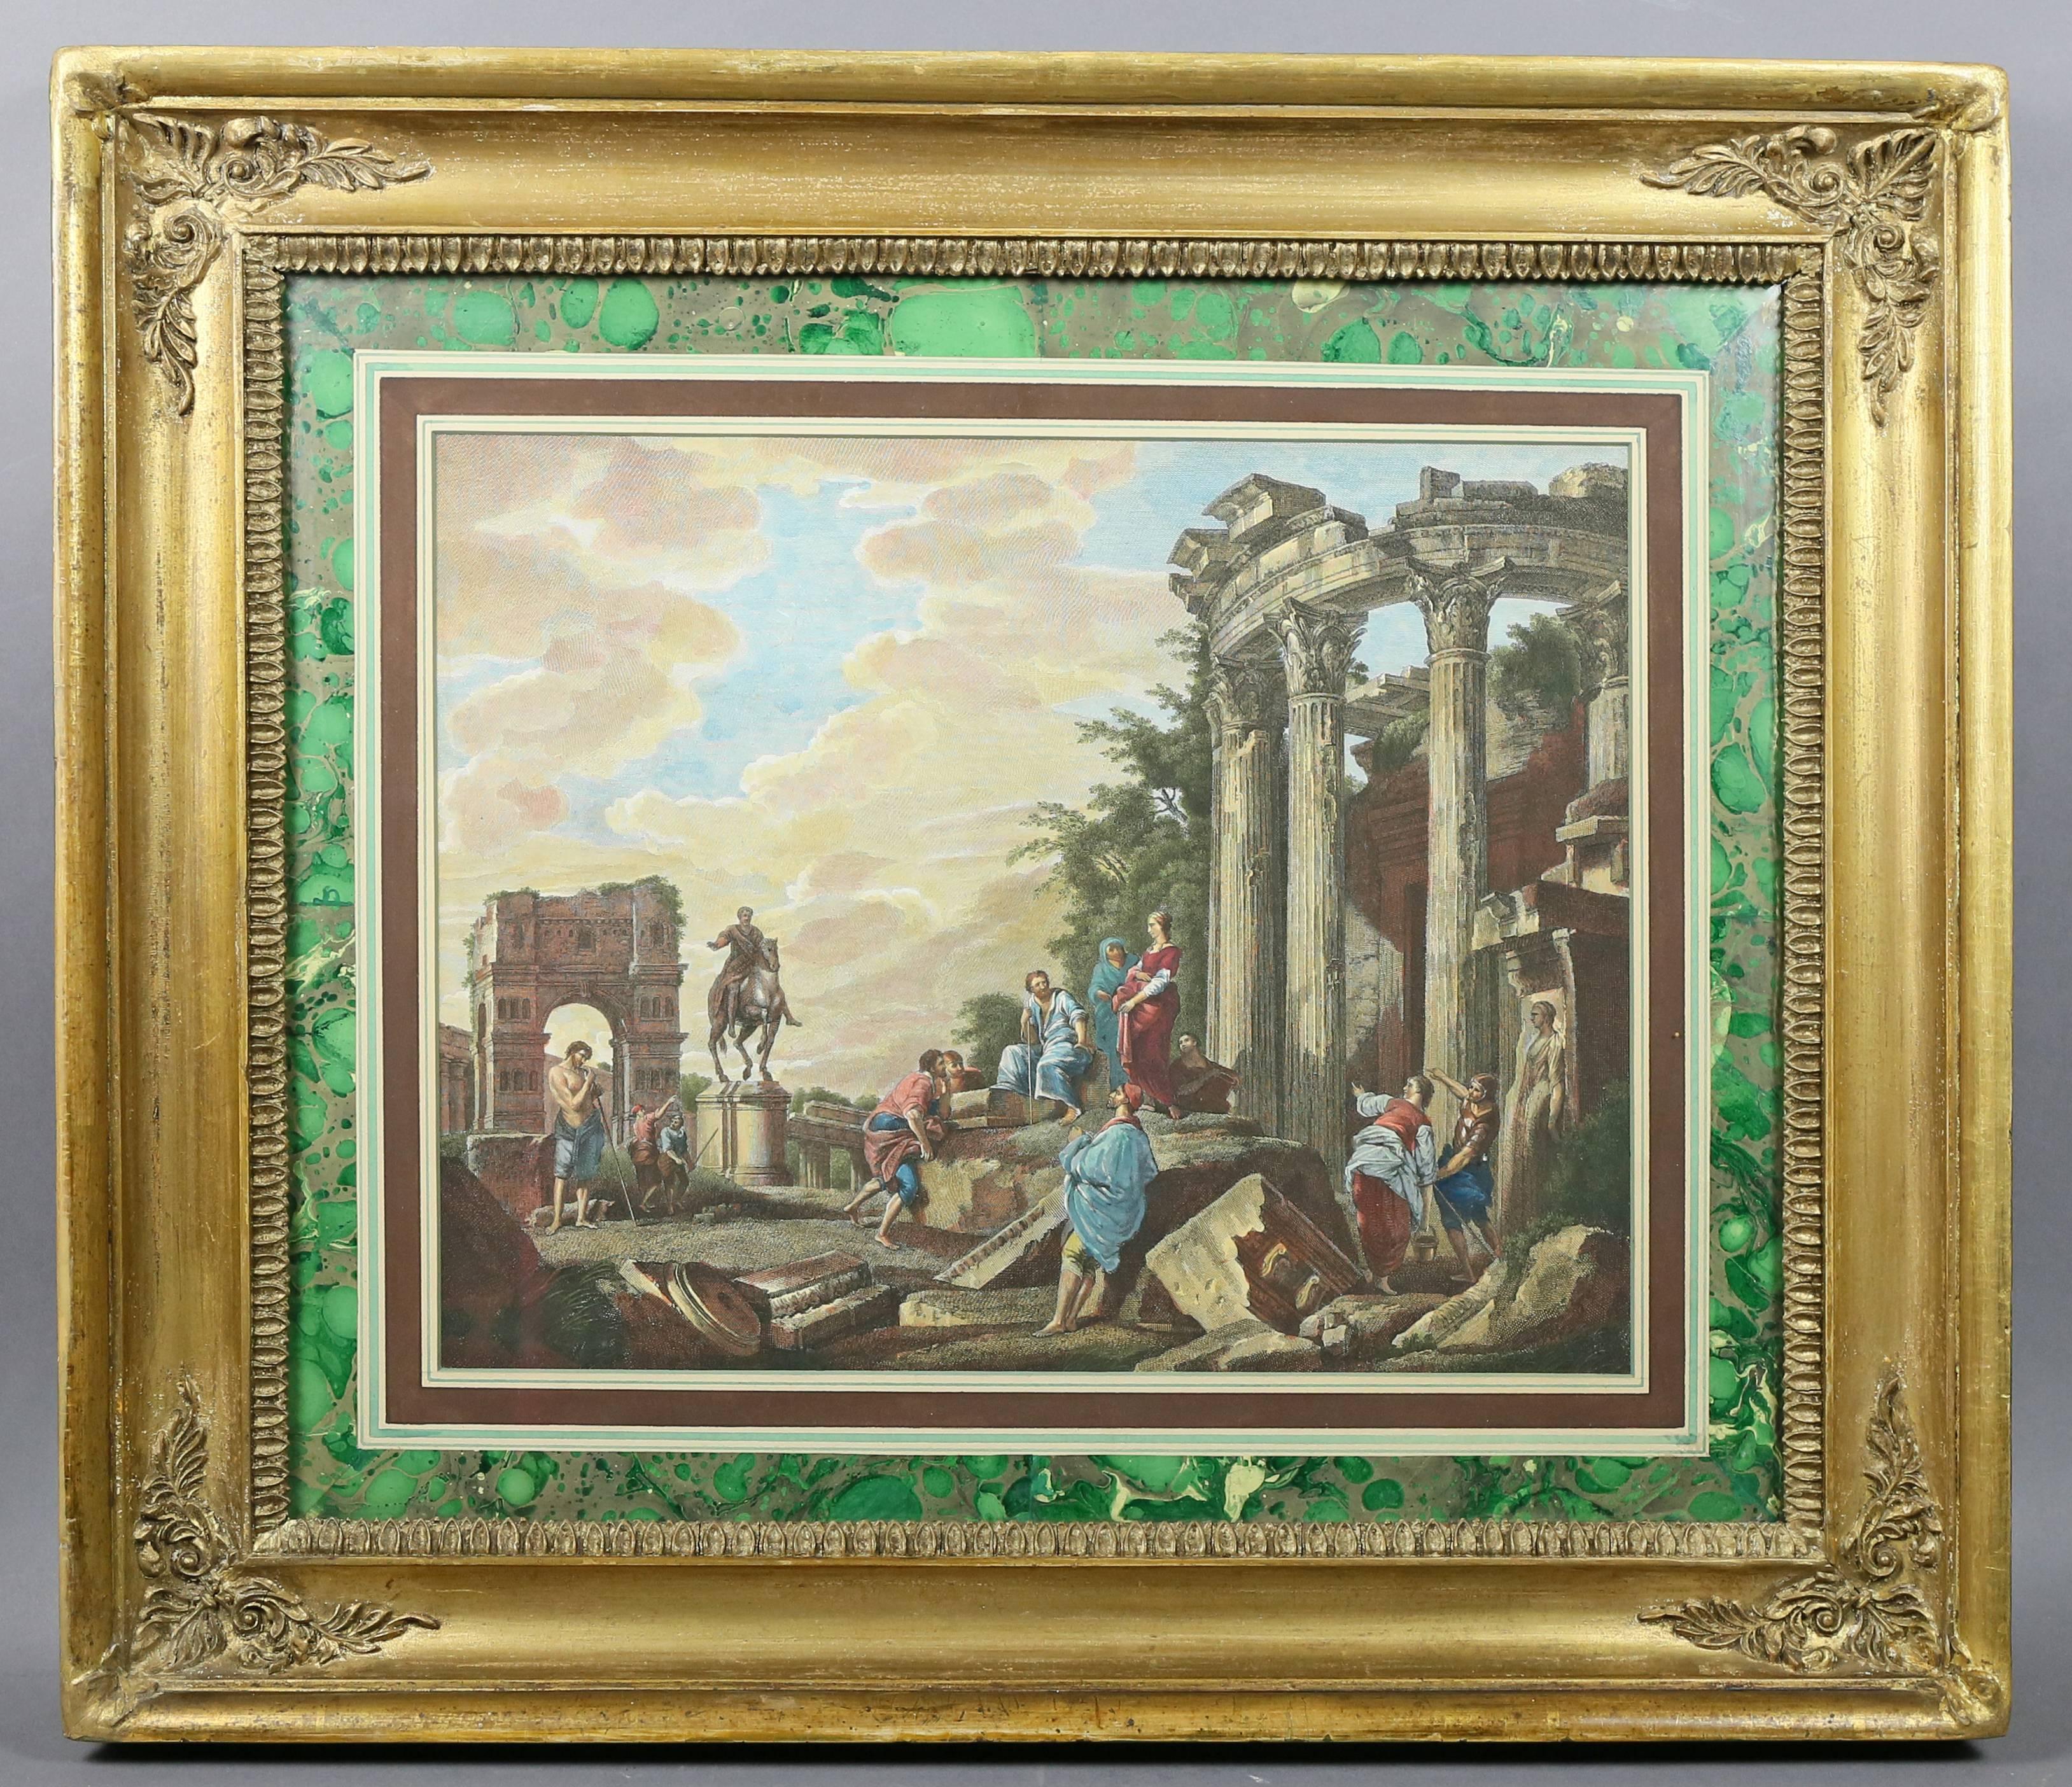 Classical scenes set in marbled matted and giltwood frames.